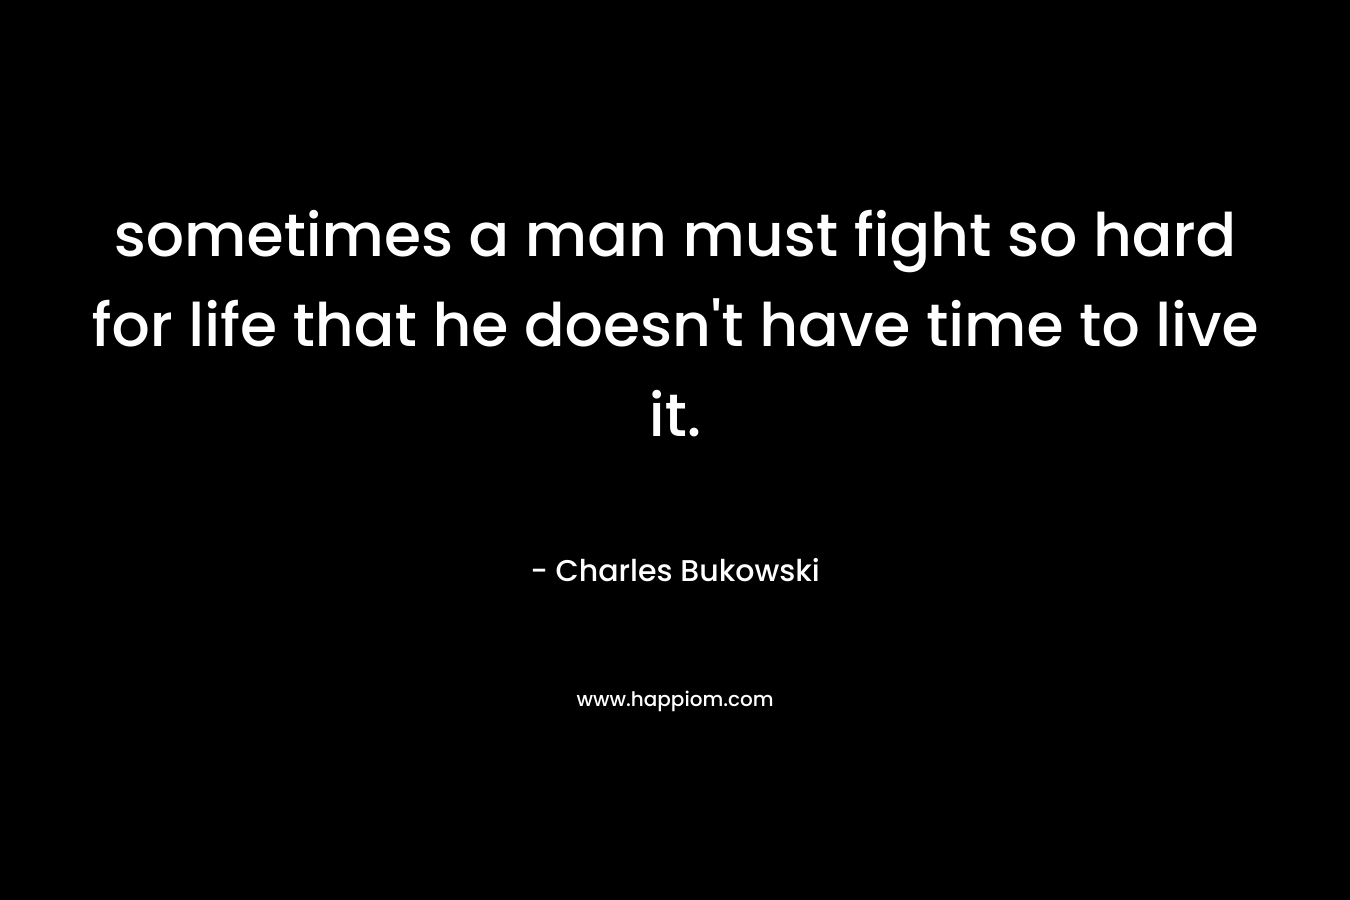 sometimes a man must fight so hard for life that he doesn't have time to live it.